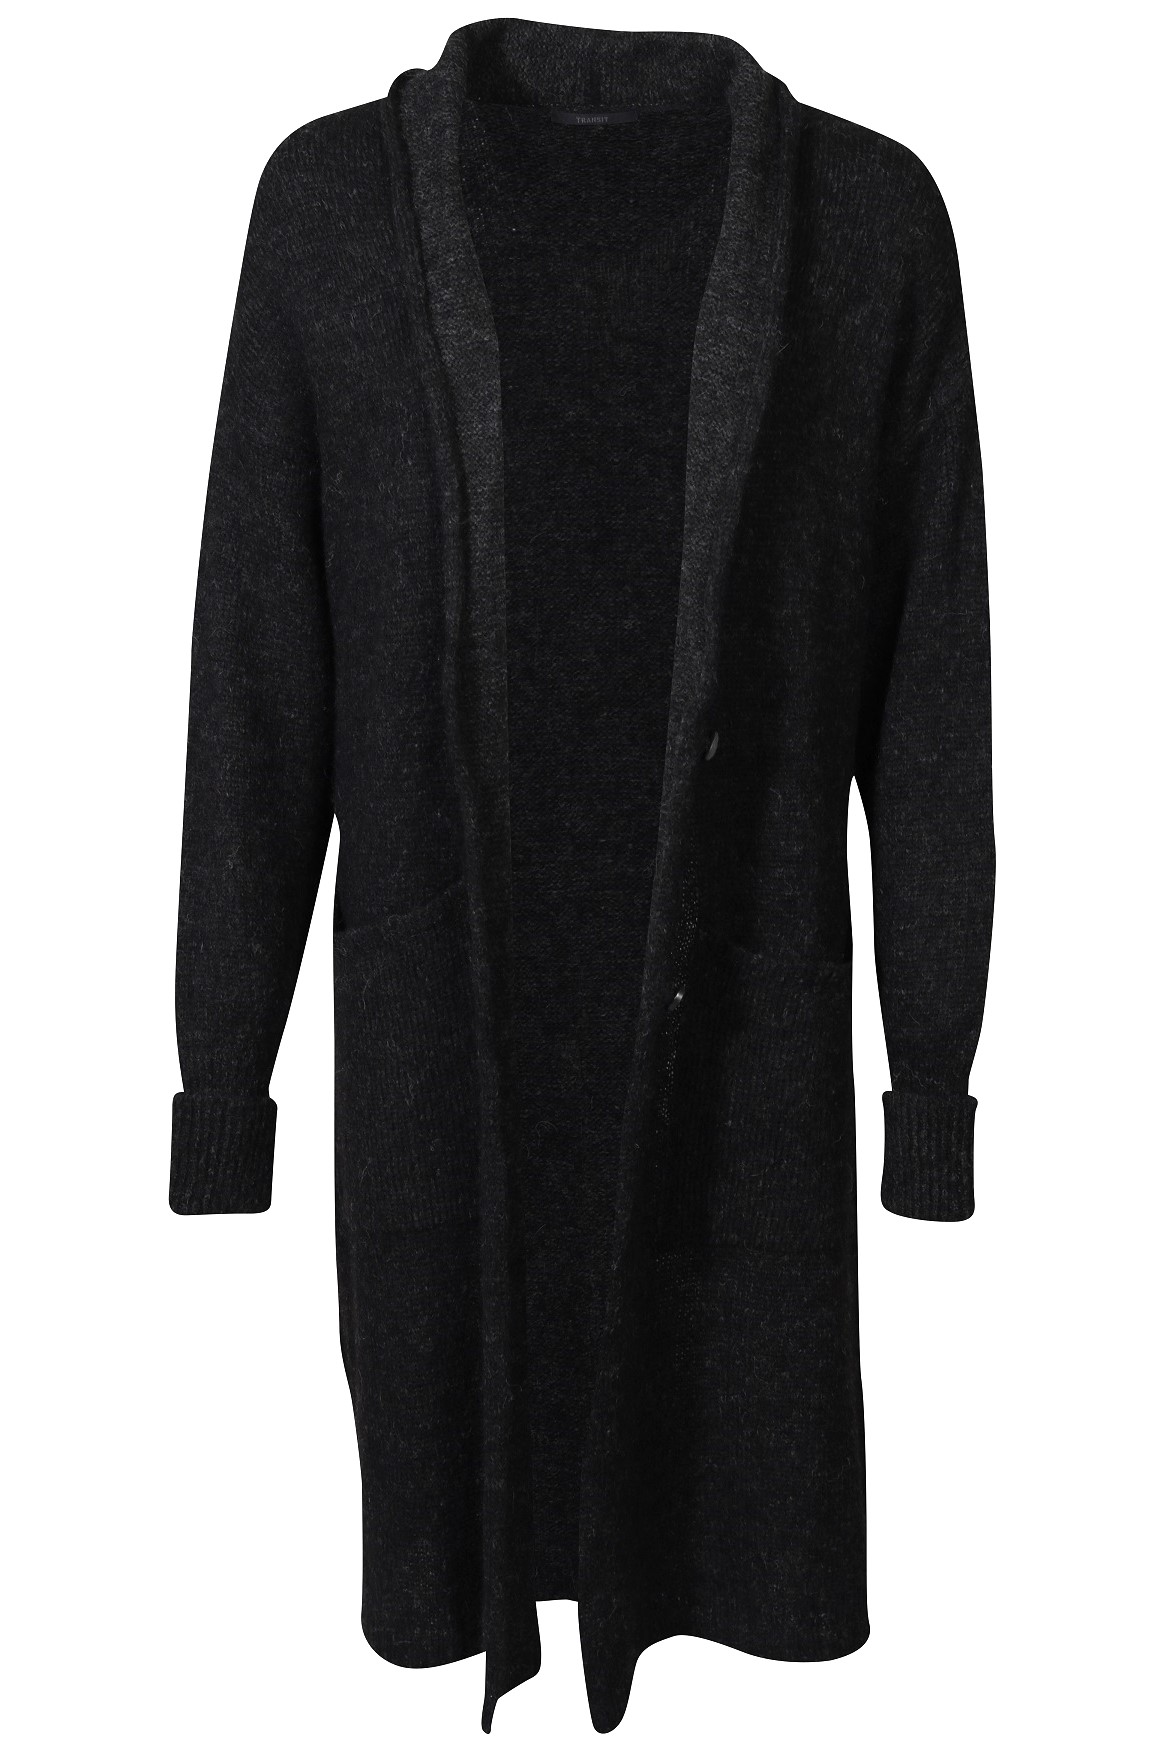 TRANSIT PAR SUCH Fluffy Knit Cardigan in Charcoal